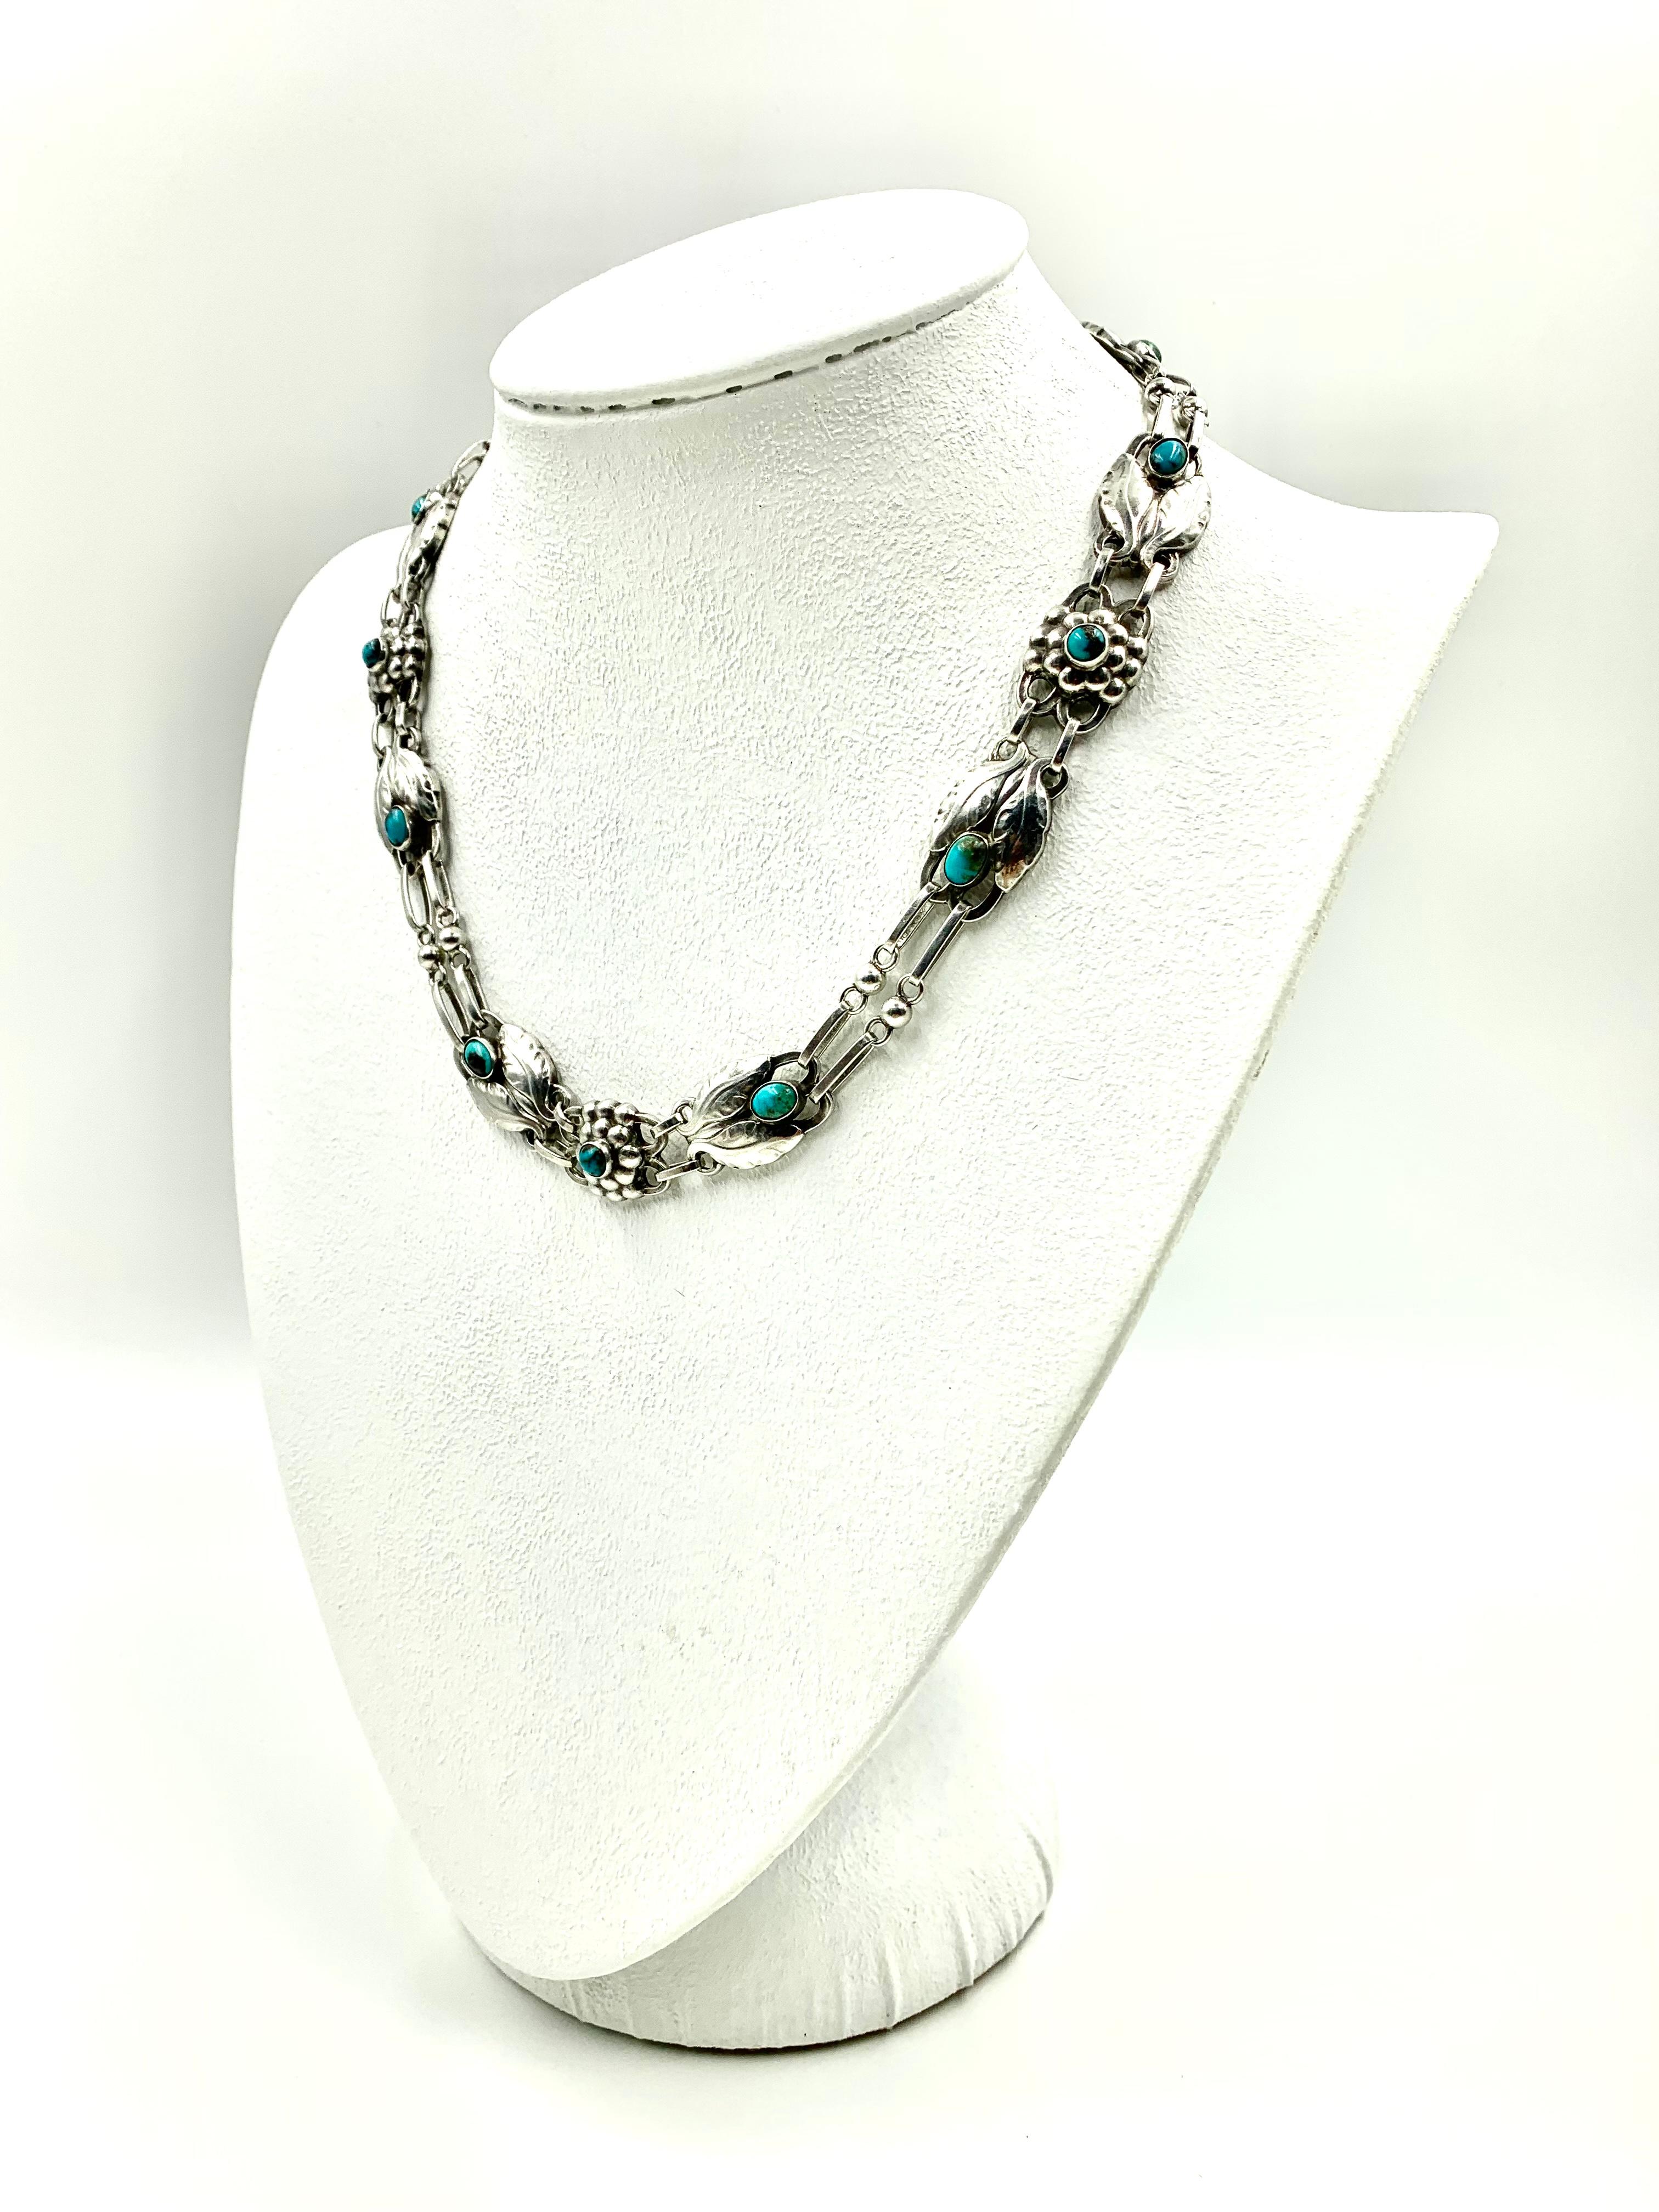 Rare Early Georg Jensen Cabochon Turquoise and Silver #1 Necklace, 1910-1925 For Sale 3